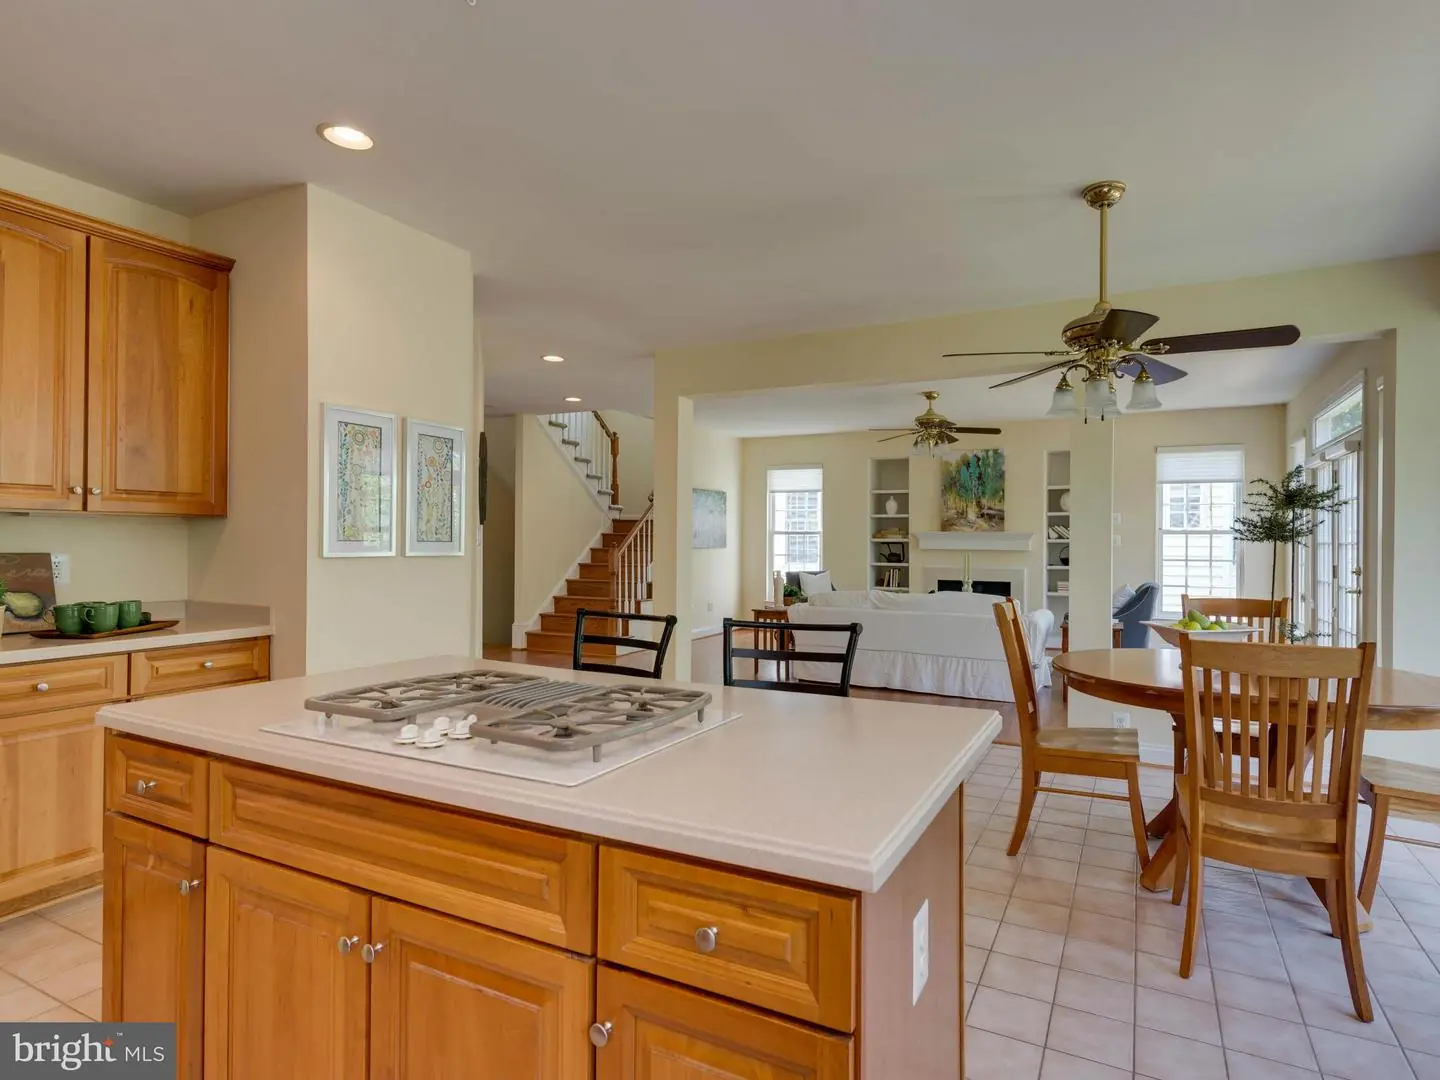 1001946313-300661328923-2021-09-06-14-19-43  |  Governors Hll | Alexandria Delaware Real Estate For Sale | MLS# 1001946313  - Best of Northern Virginia